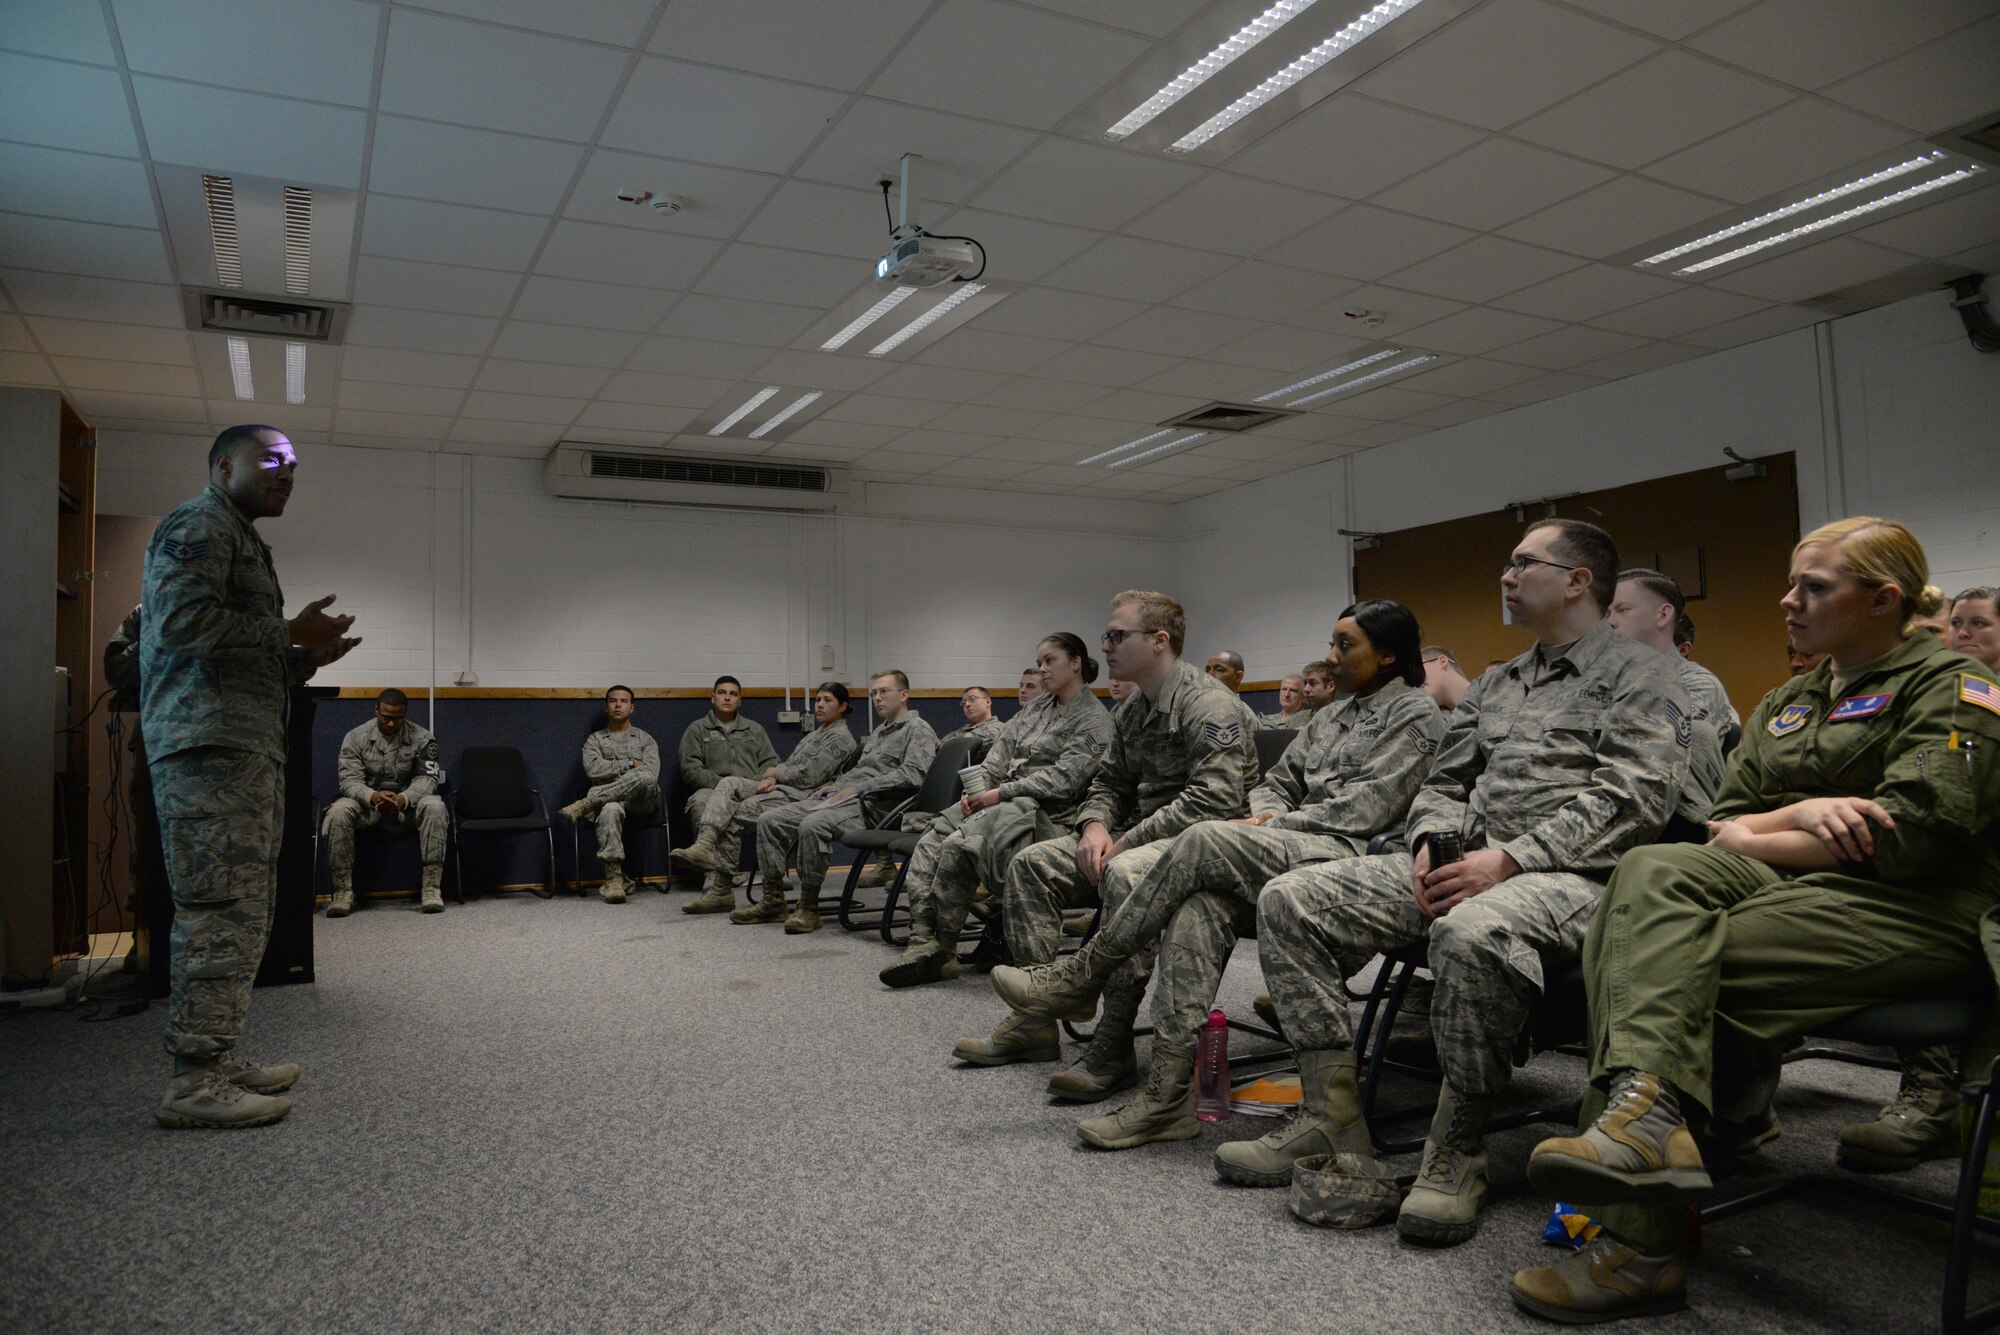 Staff Sgt. Karriem Abdulahad, 86th Security Forces Squadron training instructor, teaches Expeditionary Active Shooter Training course information to his students at Ramstein Air Base, Germany, Dec. 15, 2016. Abdulahad adds personal information to the course by informing students about his experience with active shooter situations. (U.S. Air Force photo by Airman 1st Class D. Blake Browning)